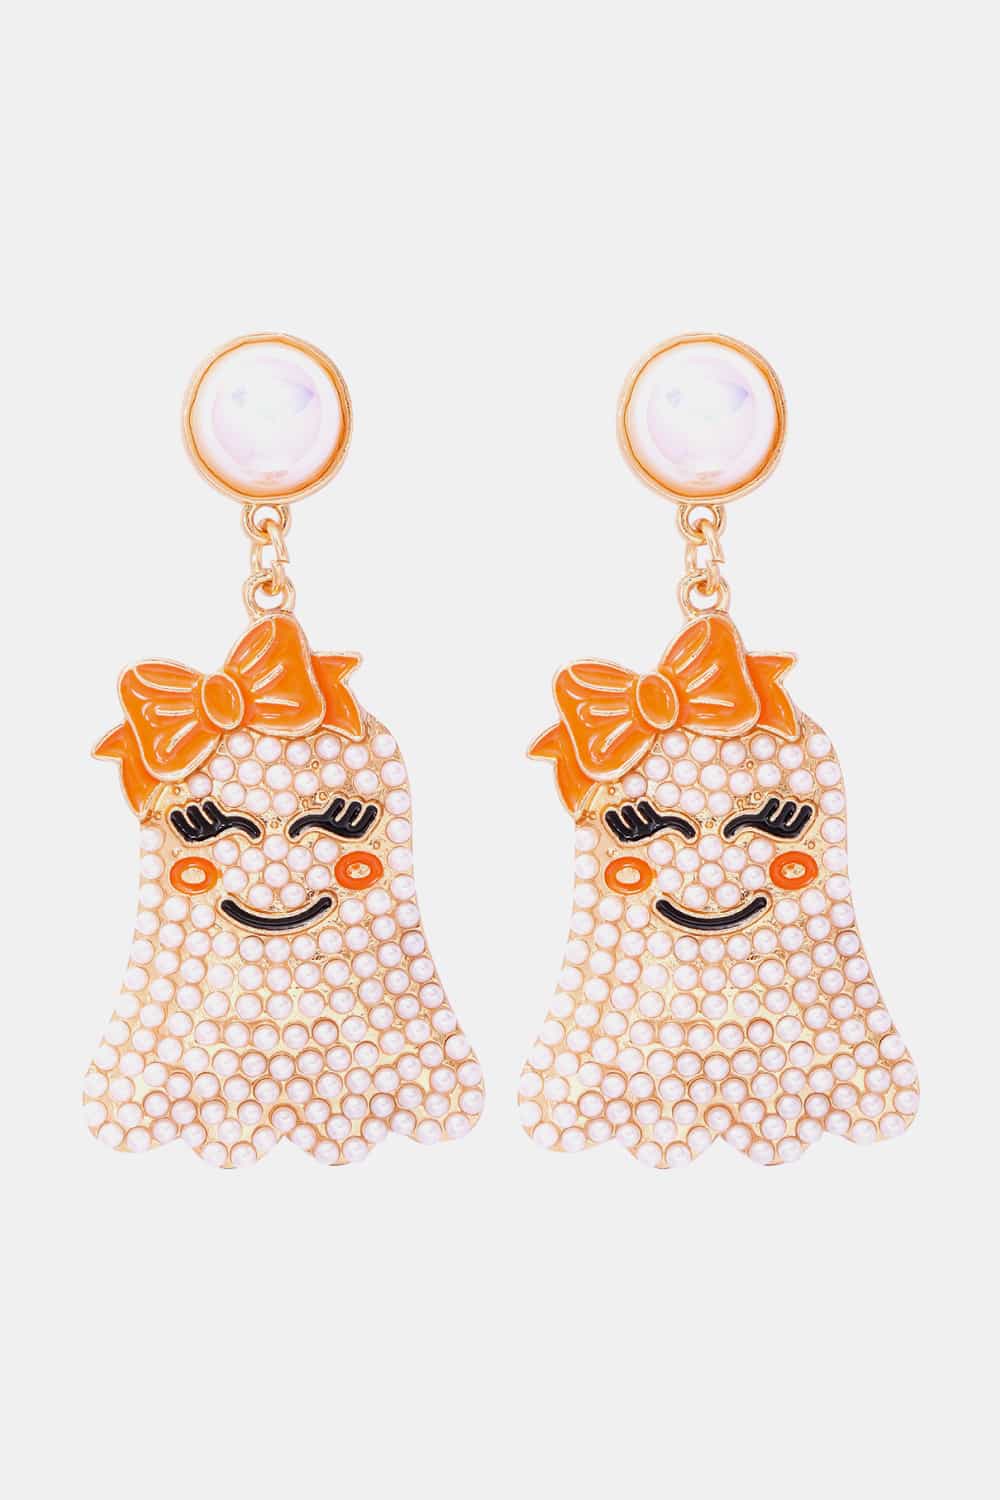 Smiling Ghost Shape Synthetic Pearl Earrings - Kawaii Stop - Charming Earrings, Dangle Earrings, Delightful Design, Dress with a Smile, Exquisite Jewelry, Ghost Shape, J.J.S.P, Joyful Fashion, Modern Style, Must-Have Accessories, Playful Accessories, Ship From Overseas, Shipping Delay 09/29/2023 - 10/04/2023, Spread Positivity, Statement Earrings, Stylish Accessories, Synthetic Pearl Jewelry, Unique Style, Whimsical Fashion, Zinc Alloy